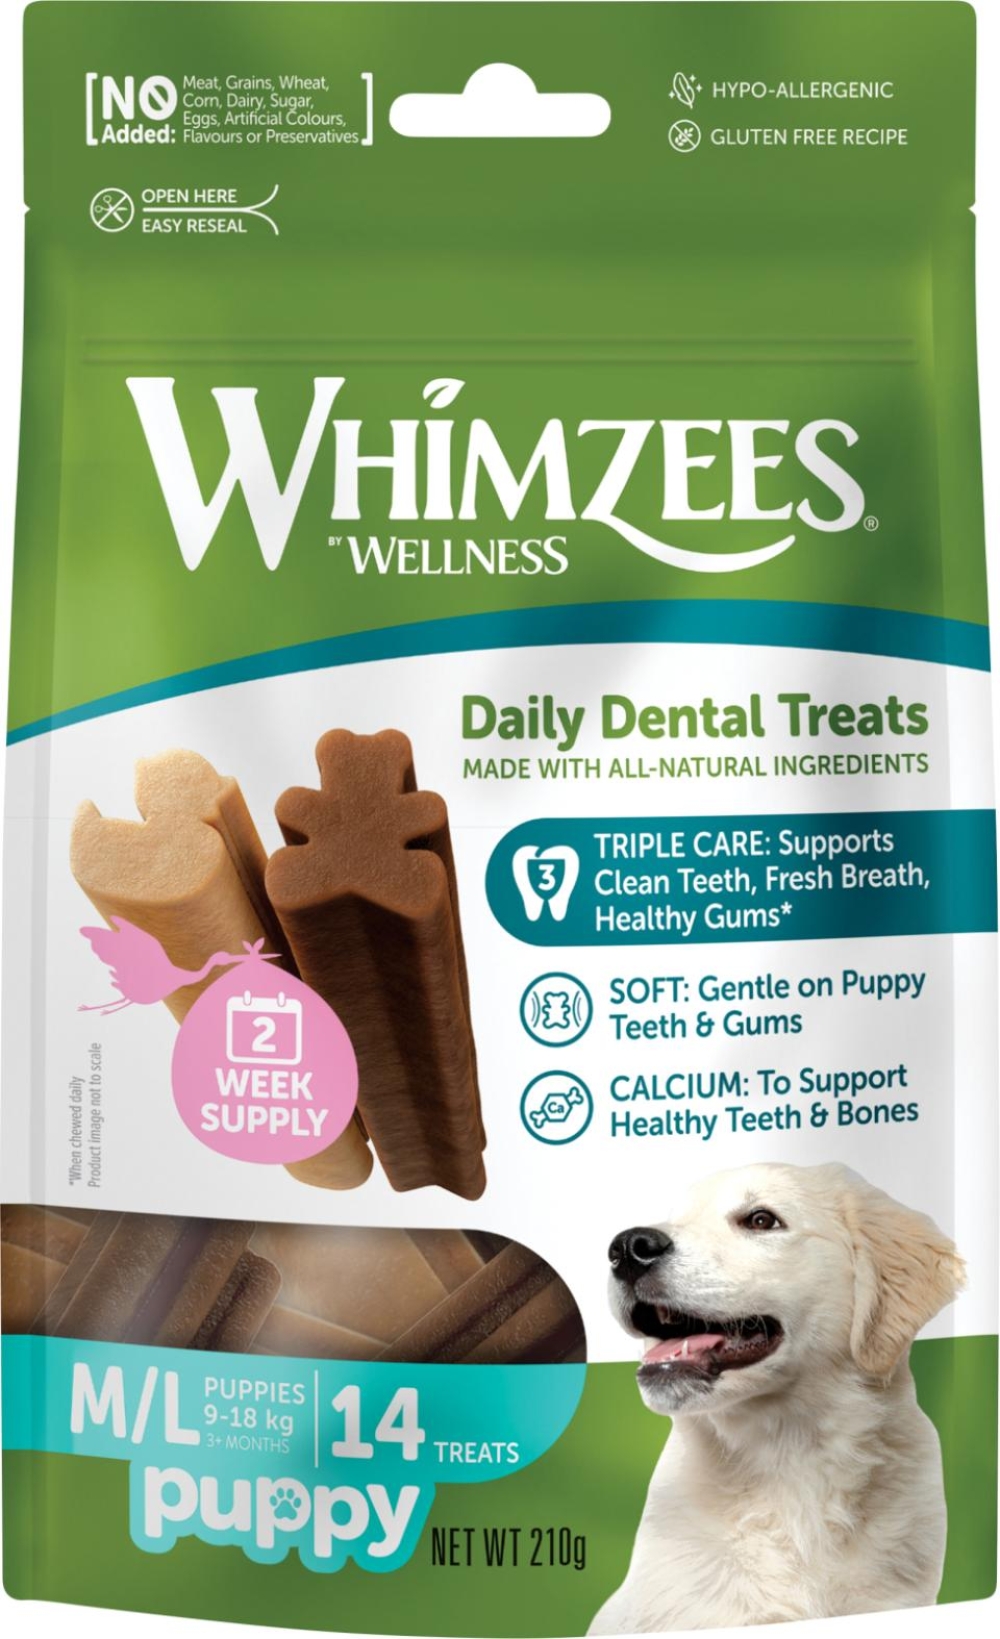 Whimzees Puppy Value Bag M/L Pose